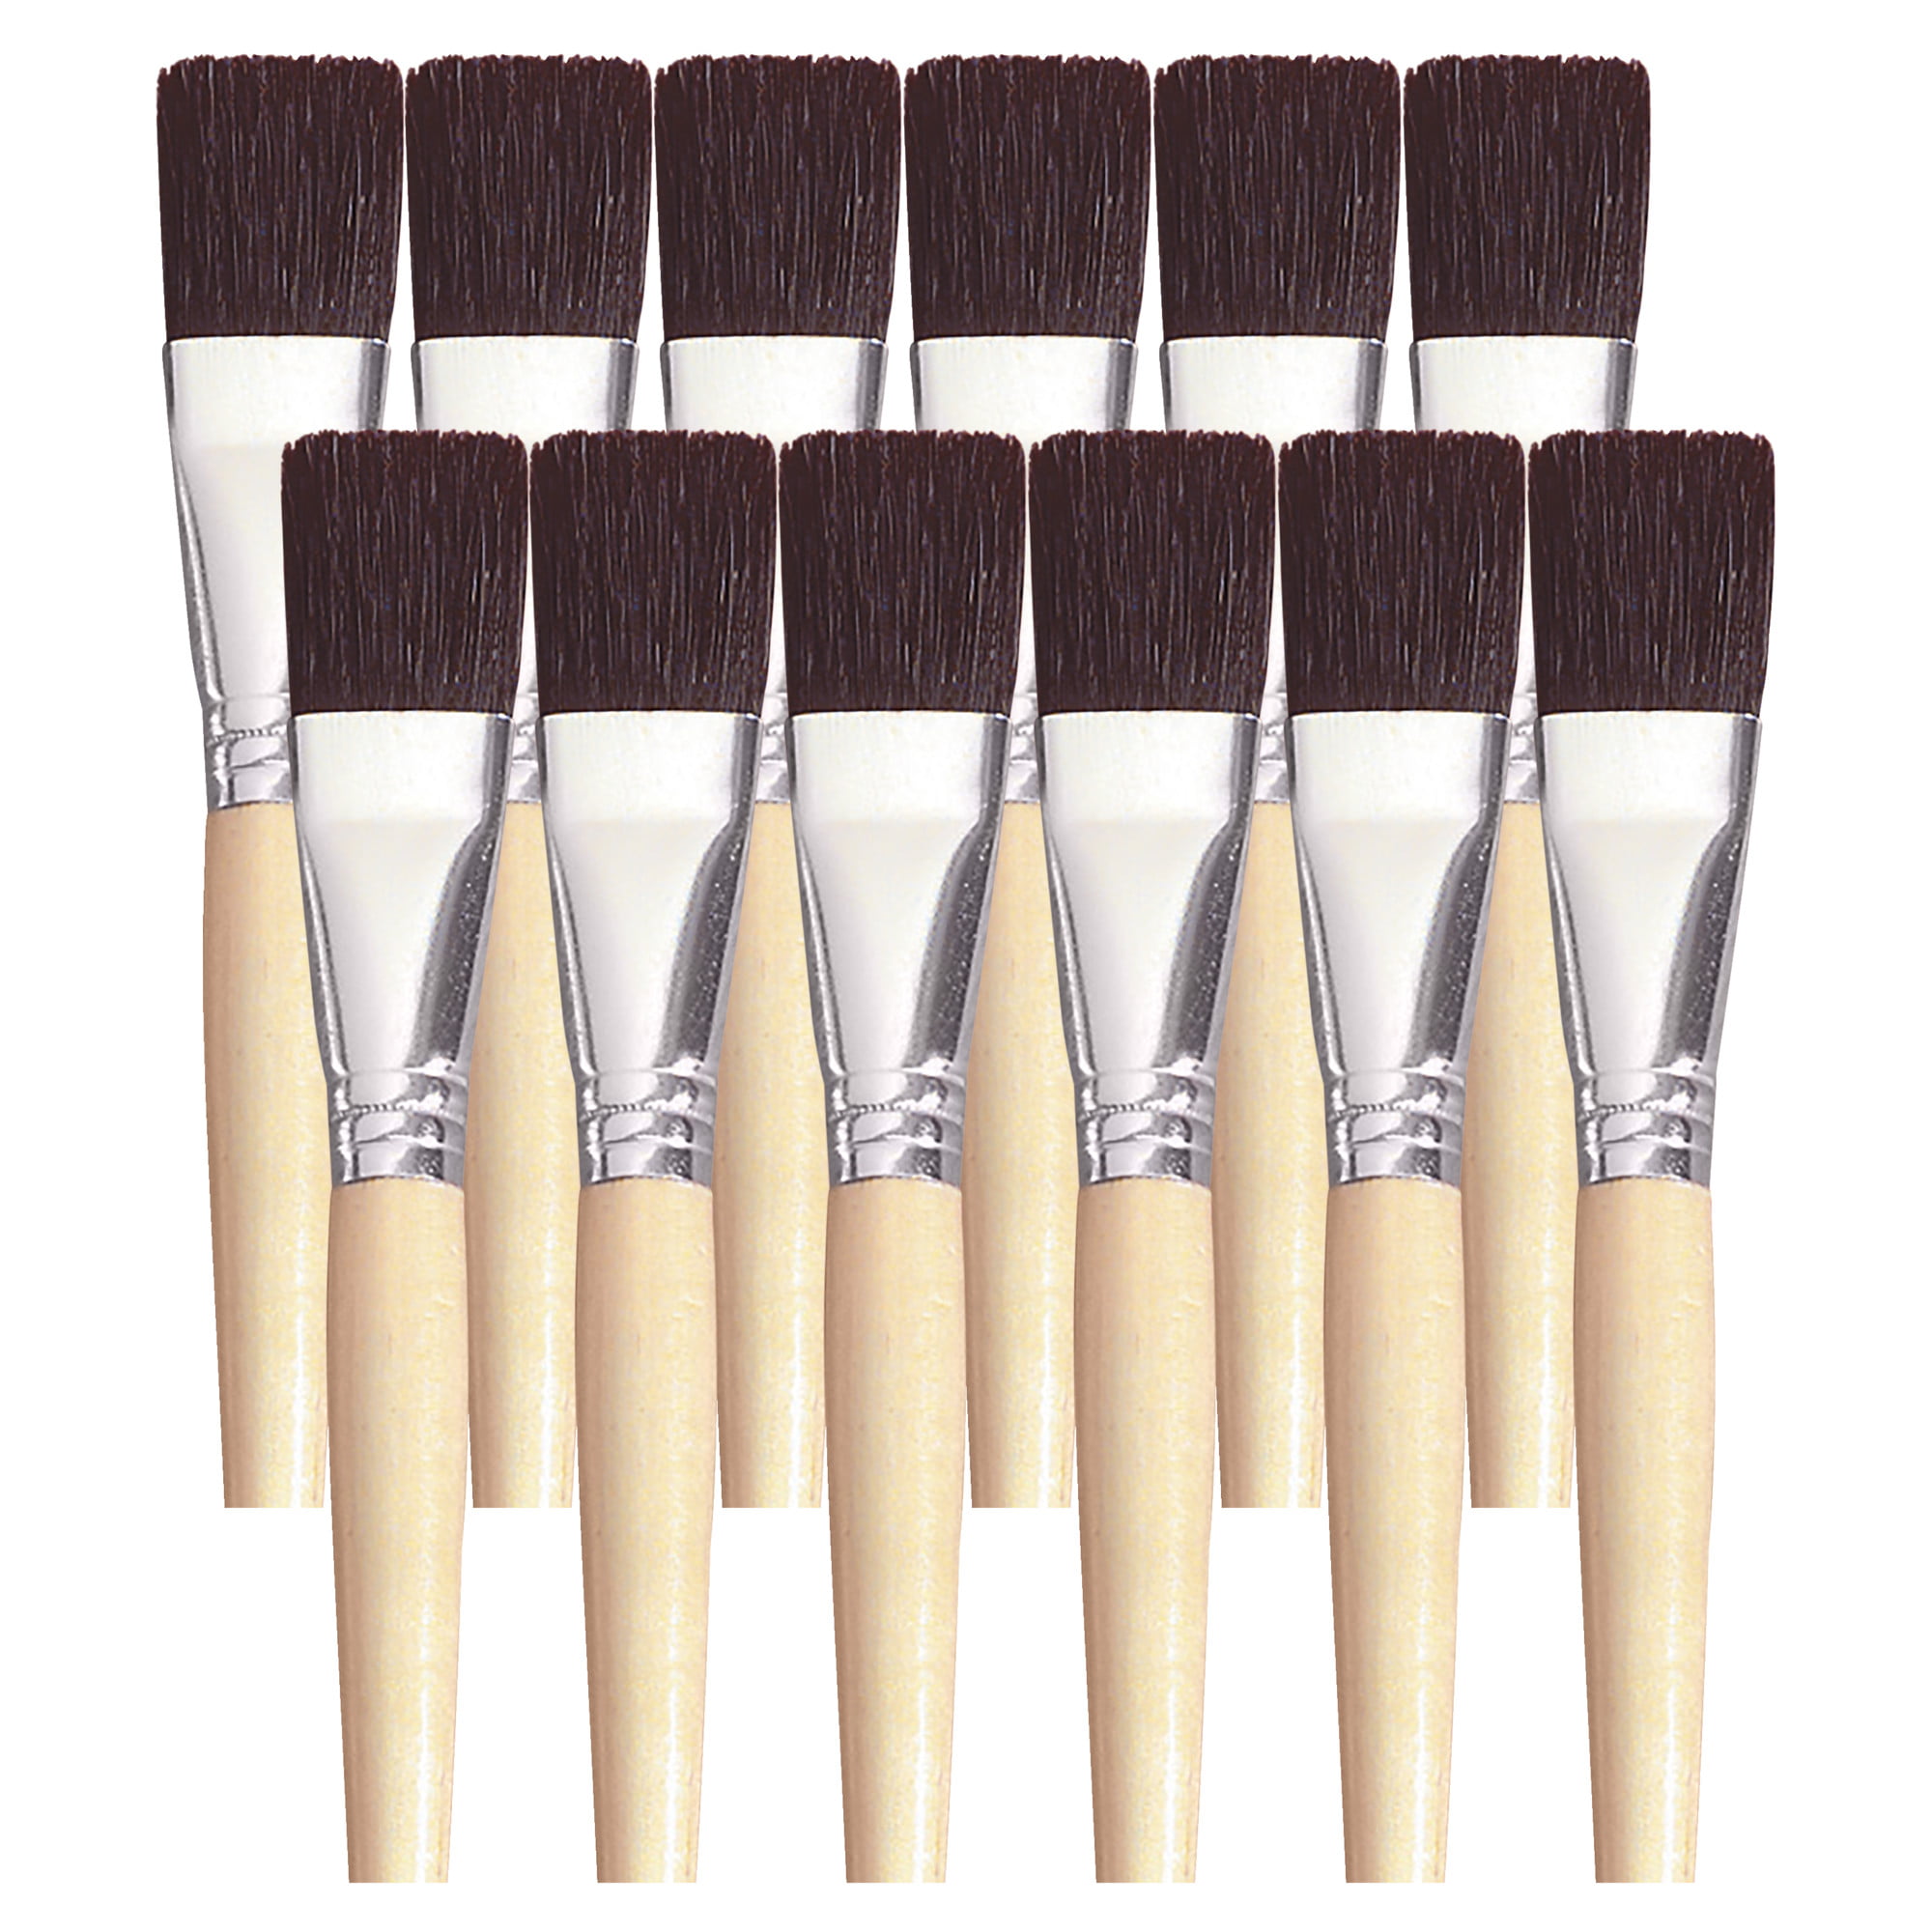 The Army Painter Most Wanted Brush Set - Miniature Small Paint Brush Set Of  3 Acrylic Paint Brushes-Includes Drybrush, Regiment Model Paint Brush &  Detail Fine Tip Paint Brush For Painting Miniatures 